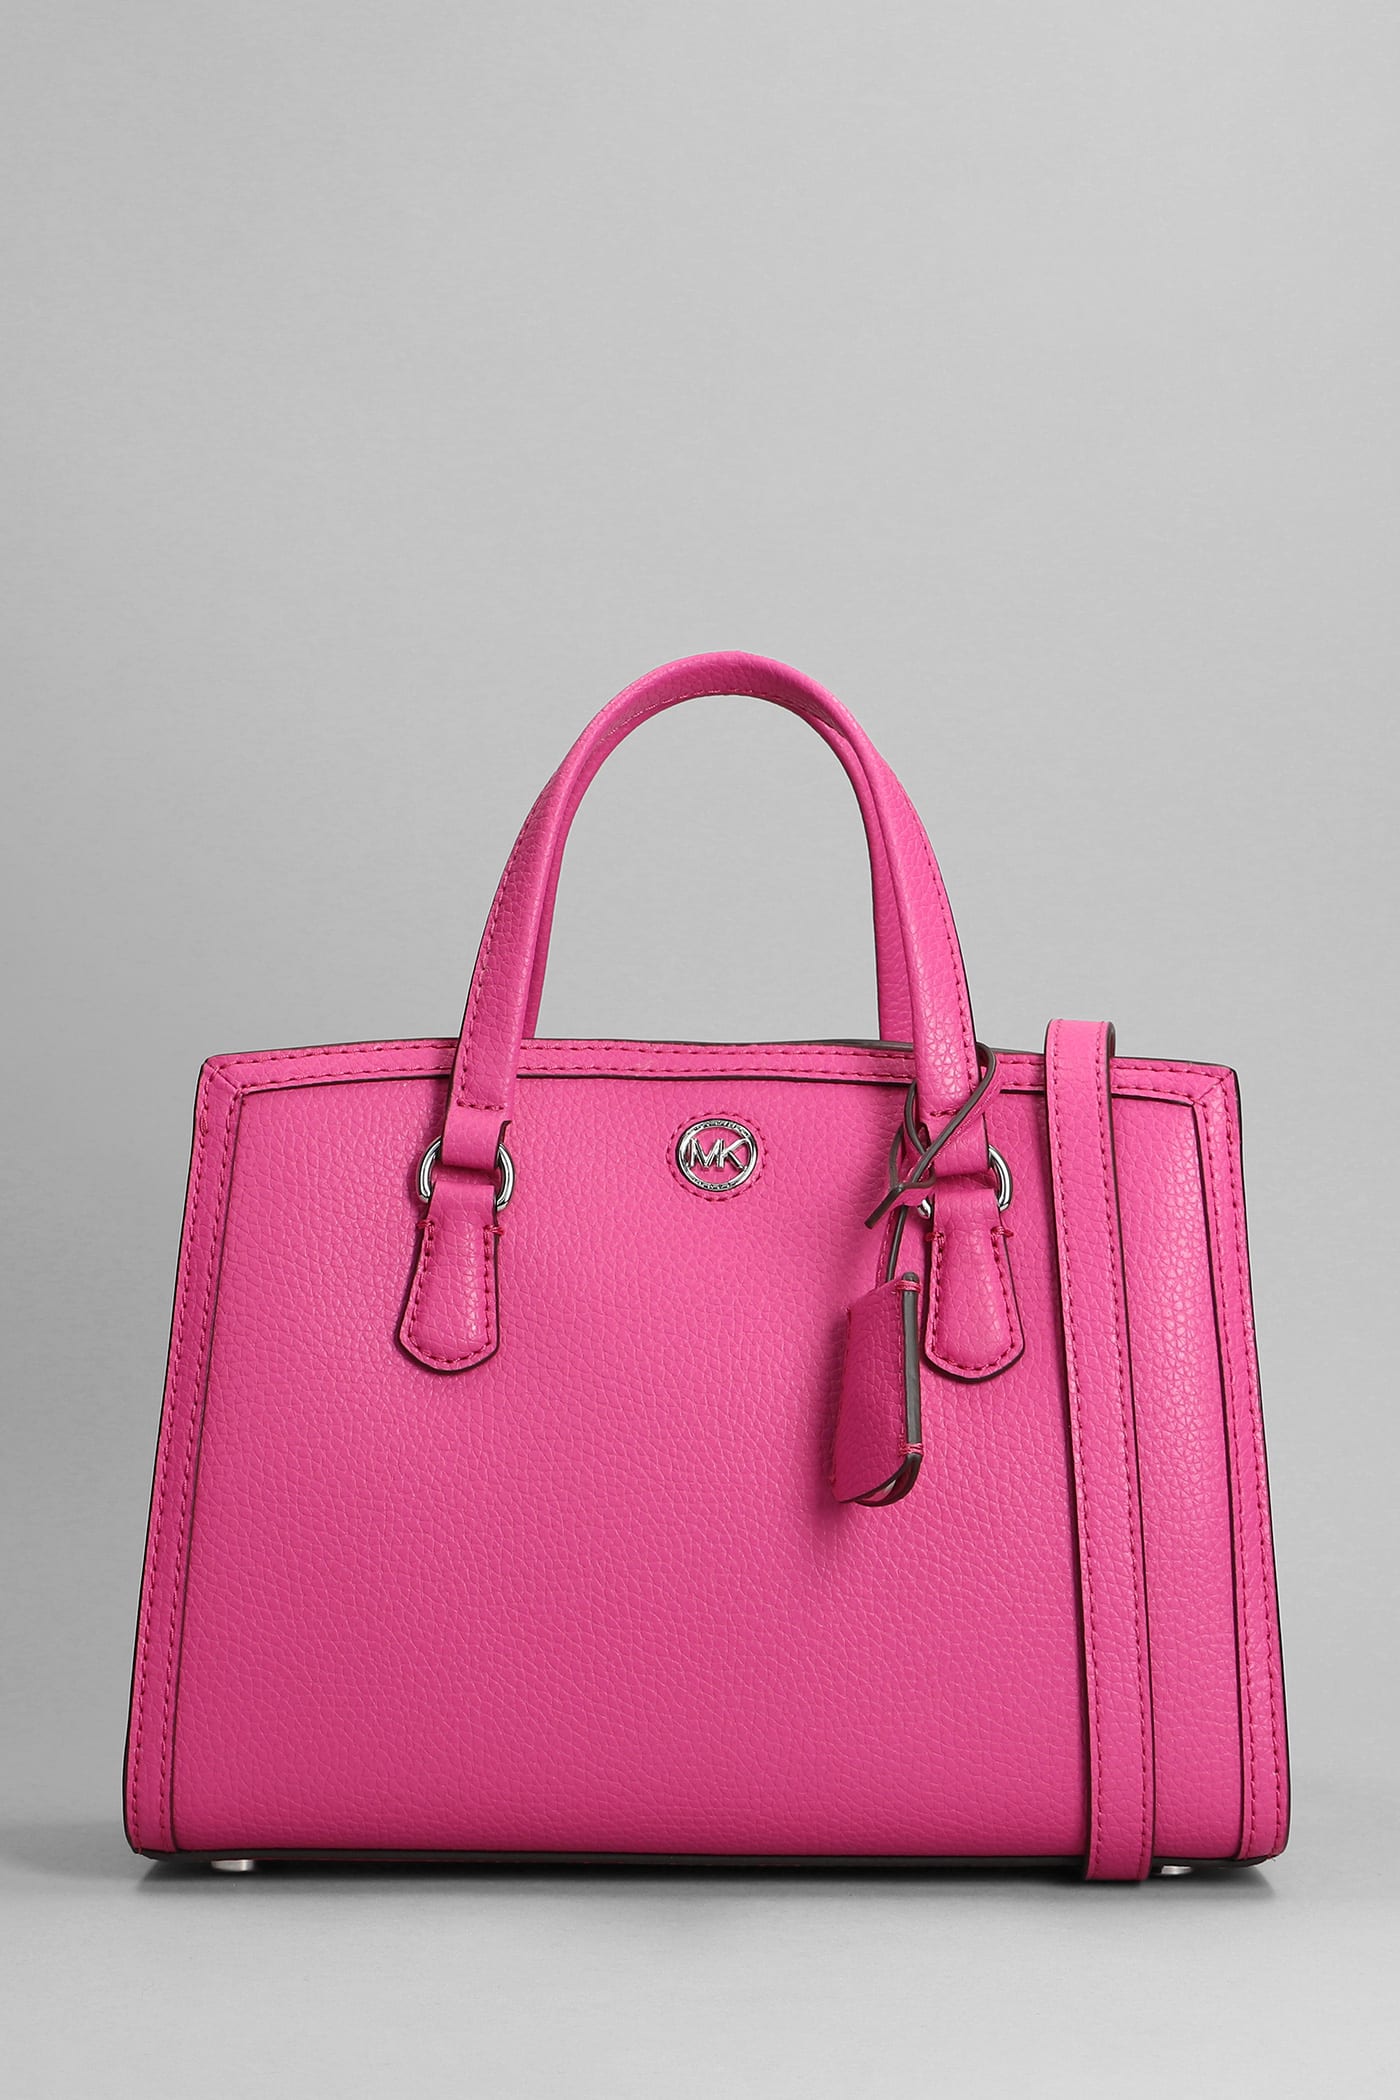 Michael Kors Chantal Hand Bag In Fuxia Leather